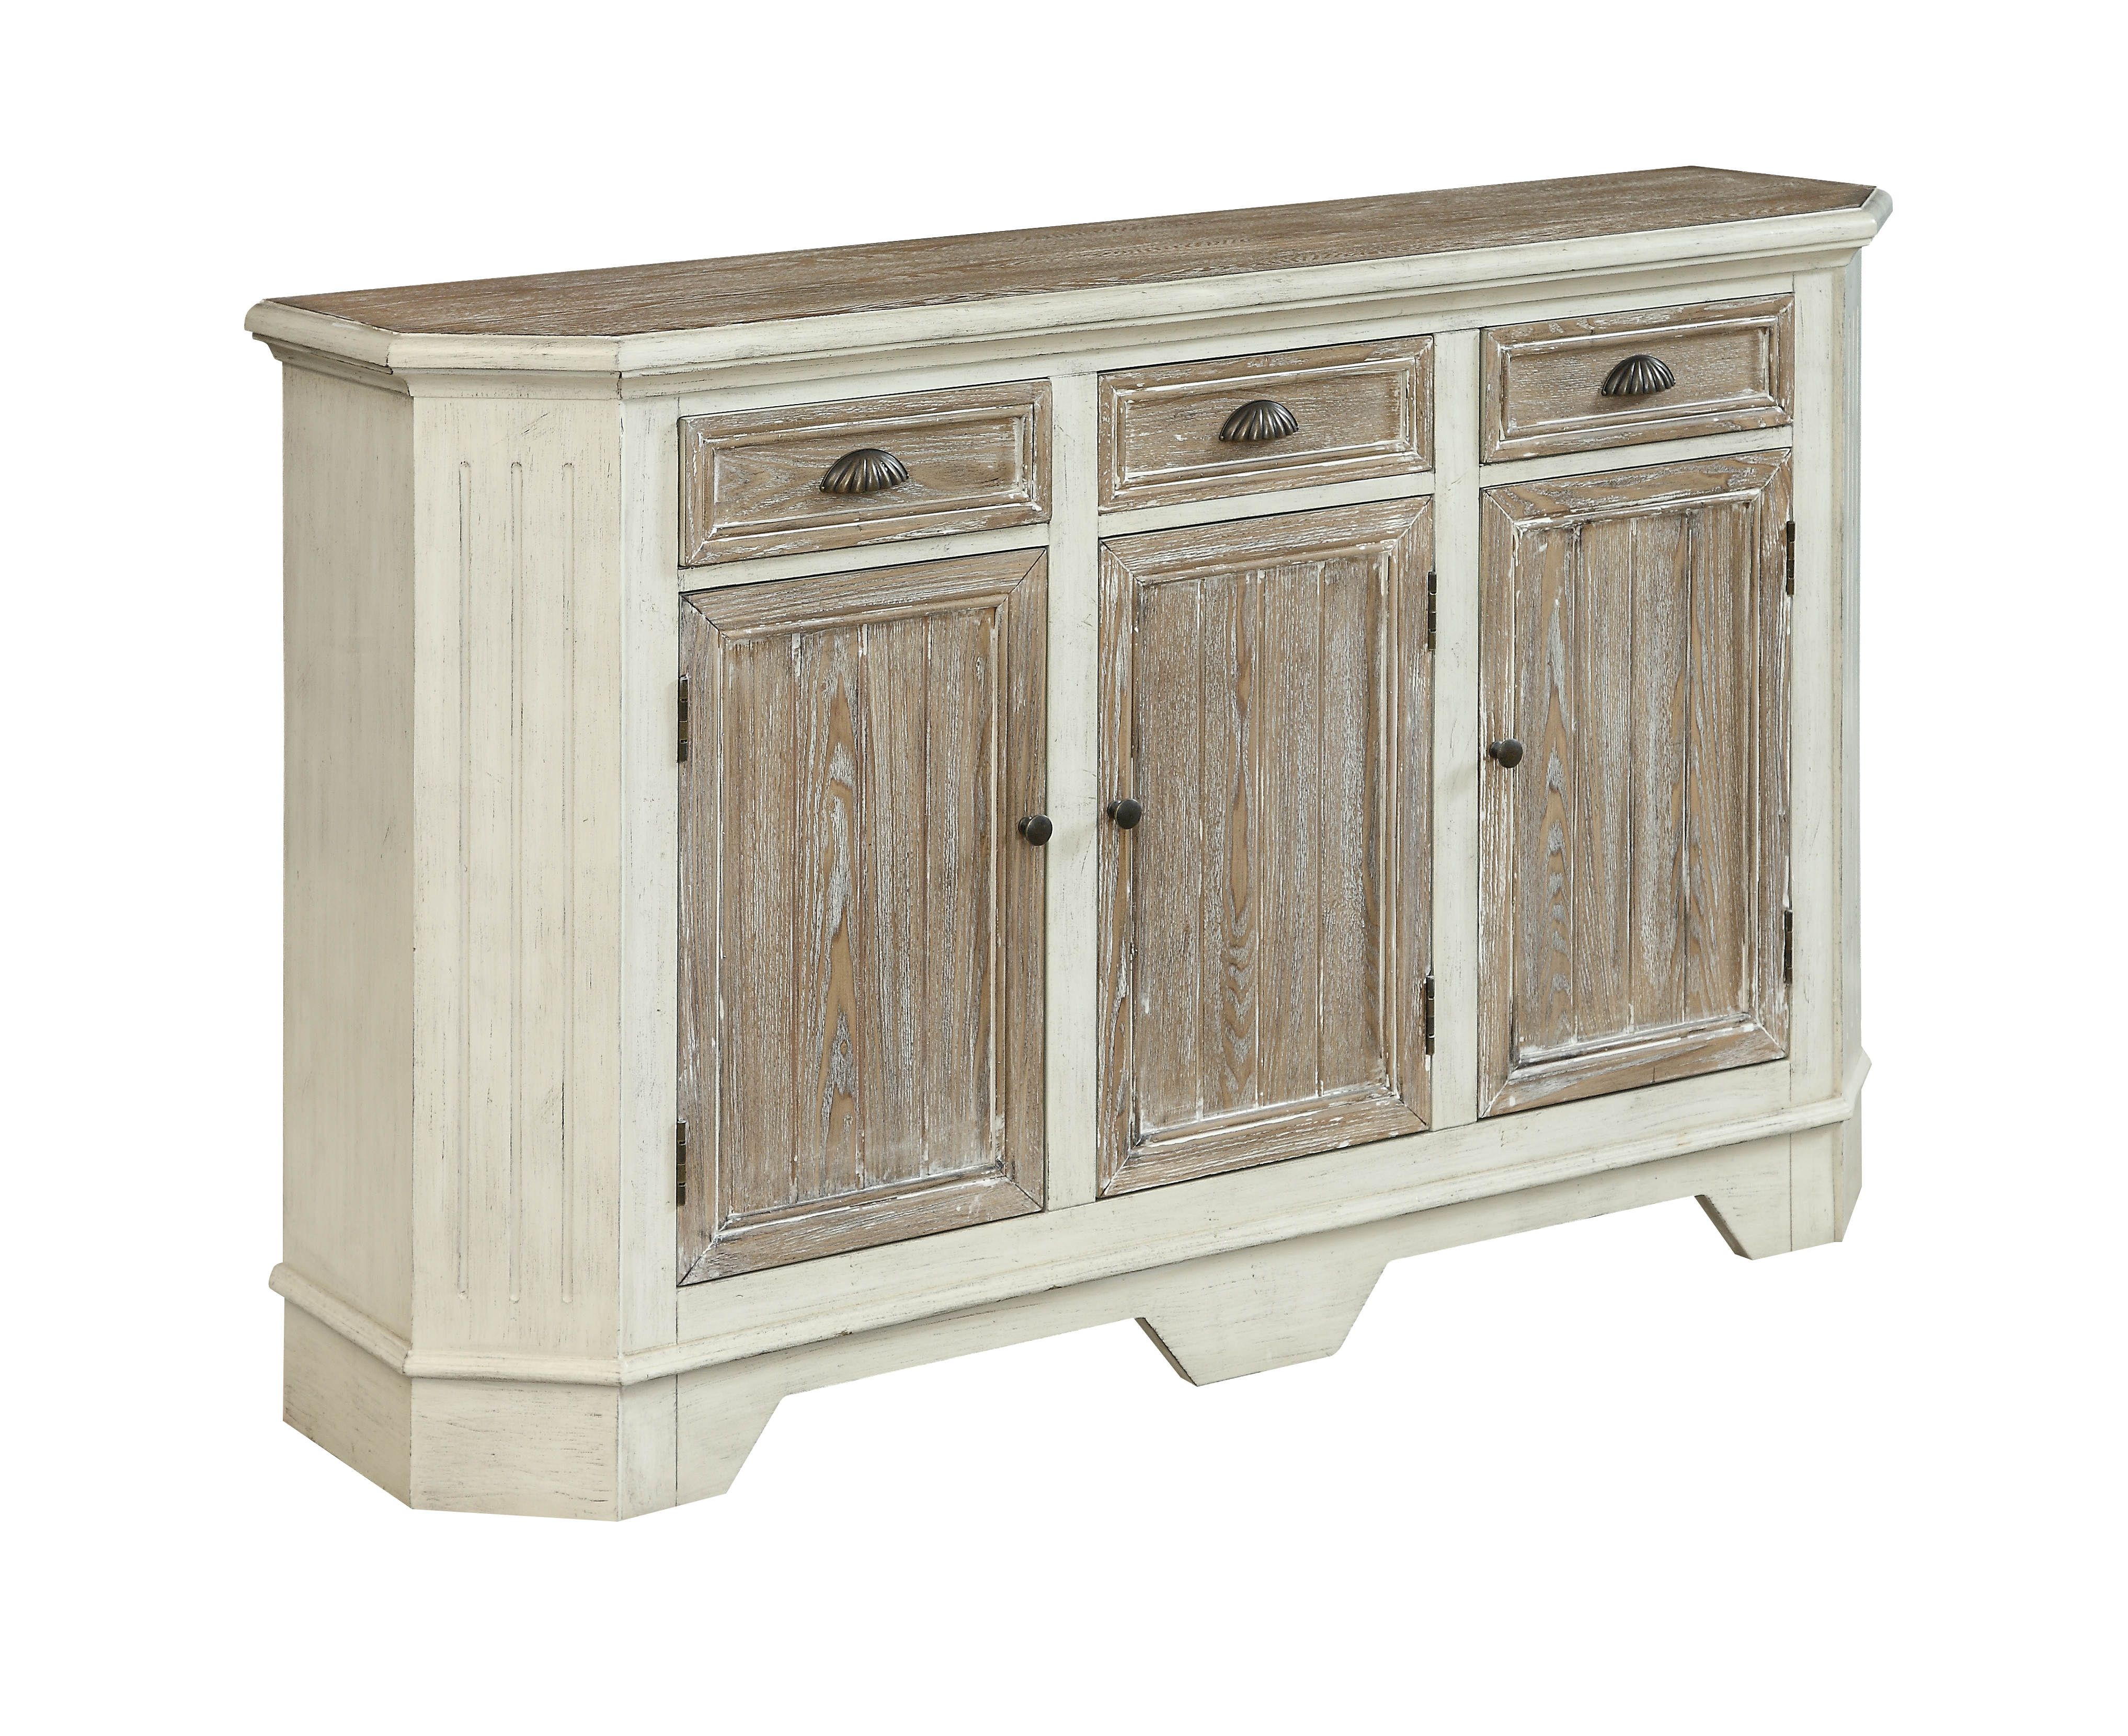 Classy I Winning Home Kitchen Credenza Ideas Wheeland Throughout Recent Amityville Wood Sideboards (View 14 of 20)